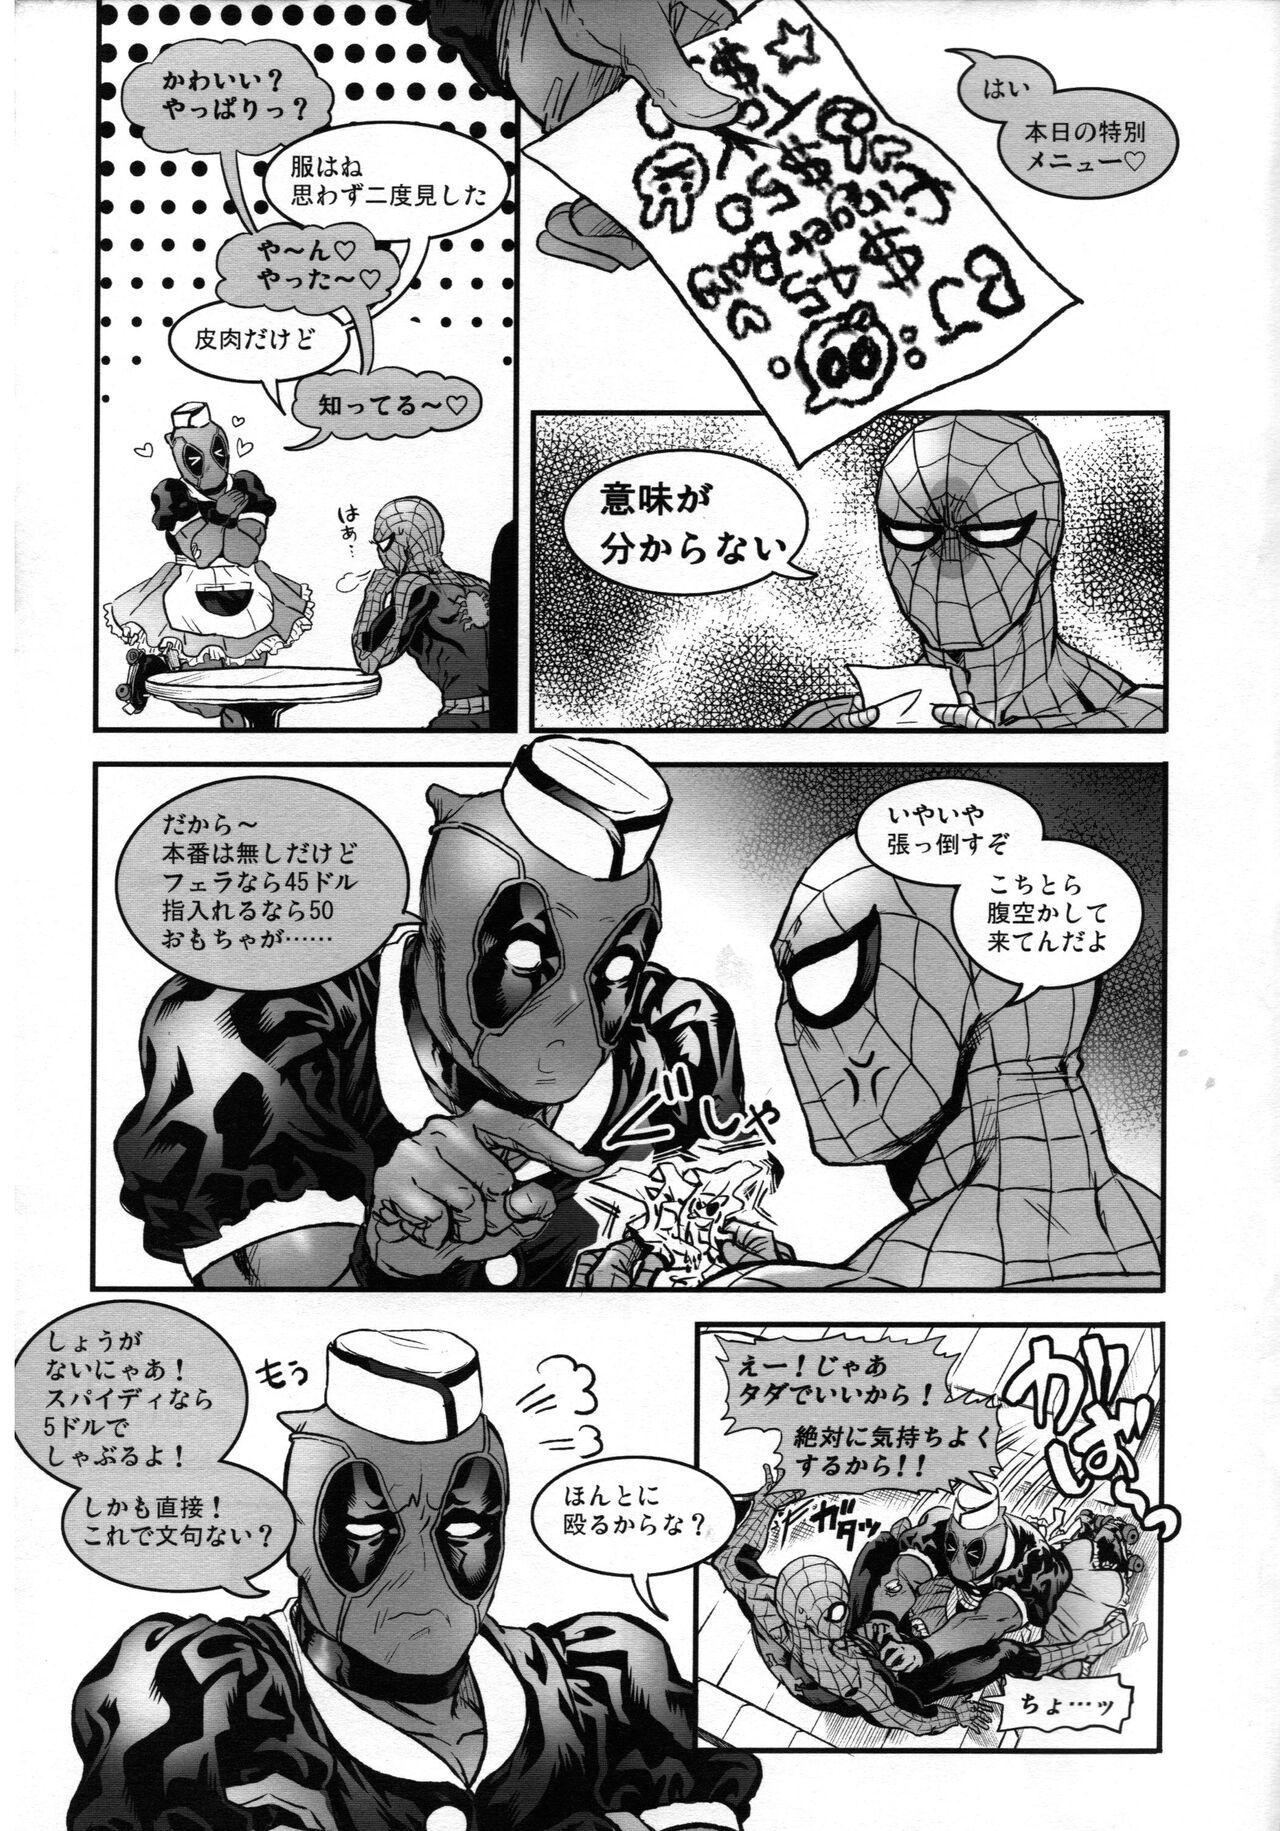 Negra TAKE OUT! - Spider man Deadpool Threeway - Page 4